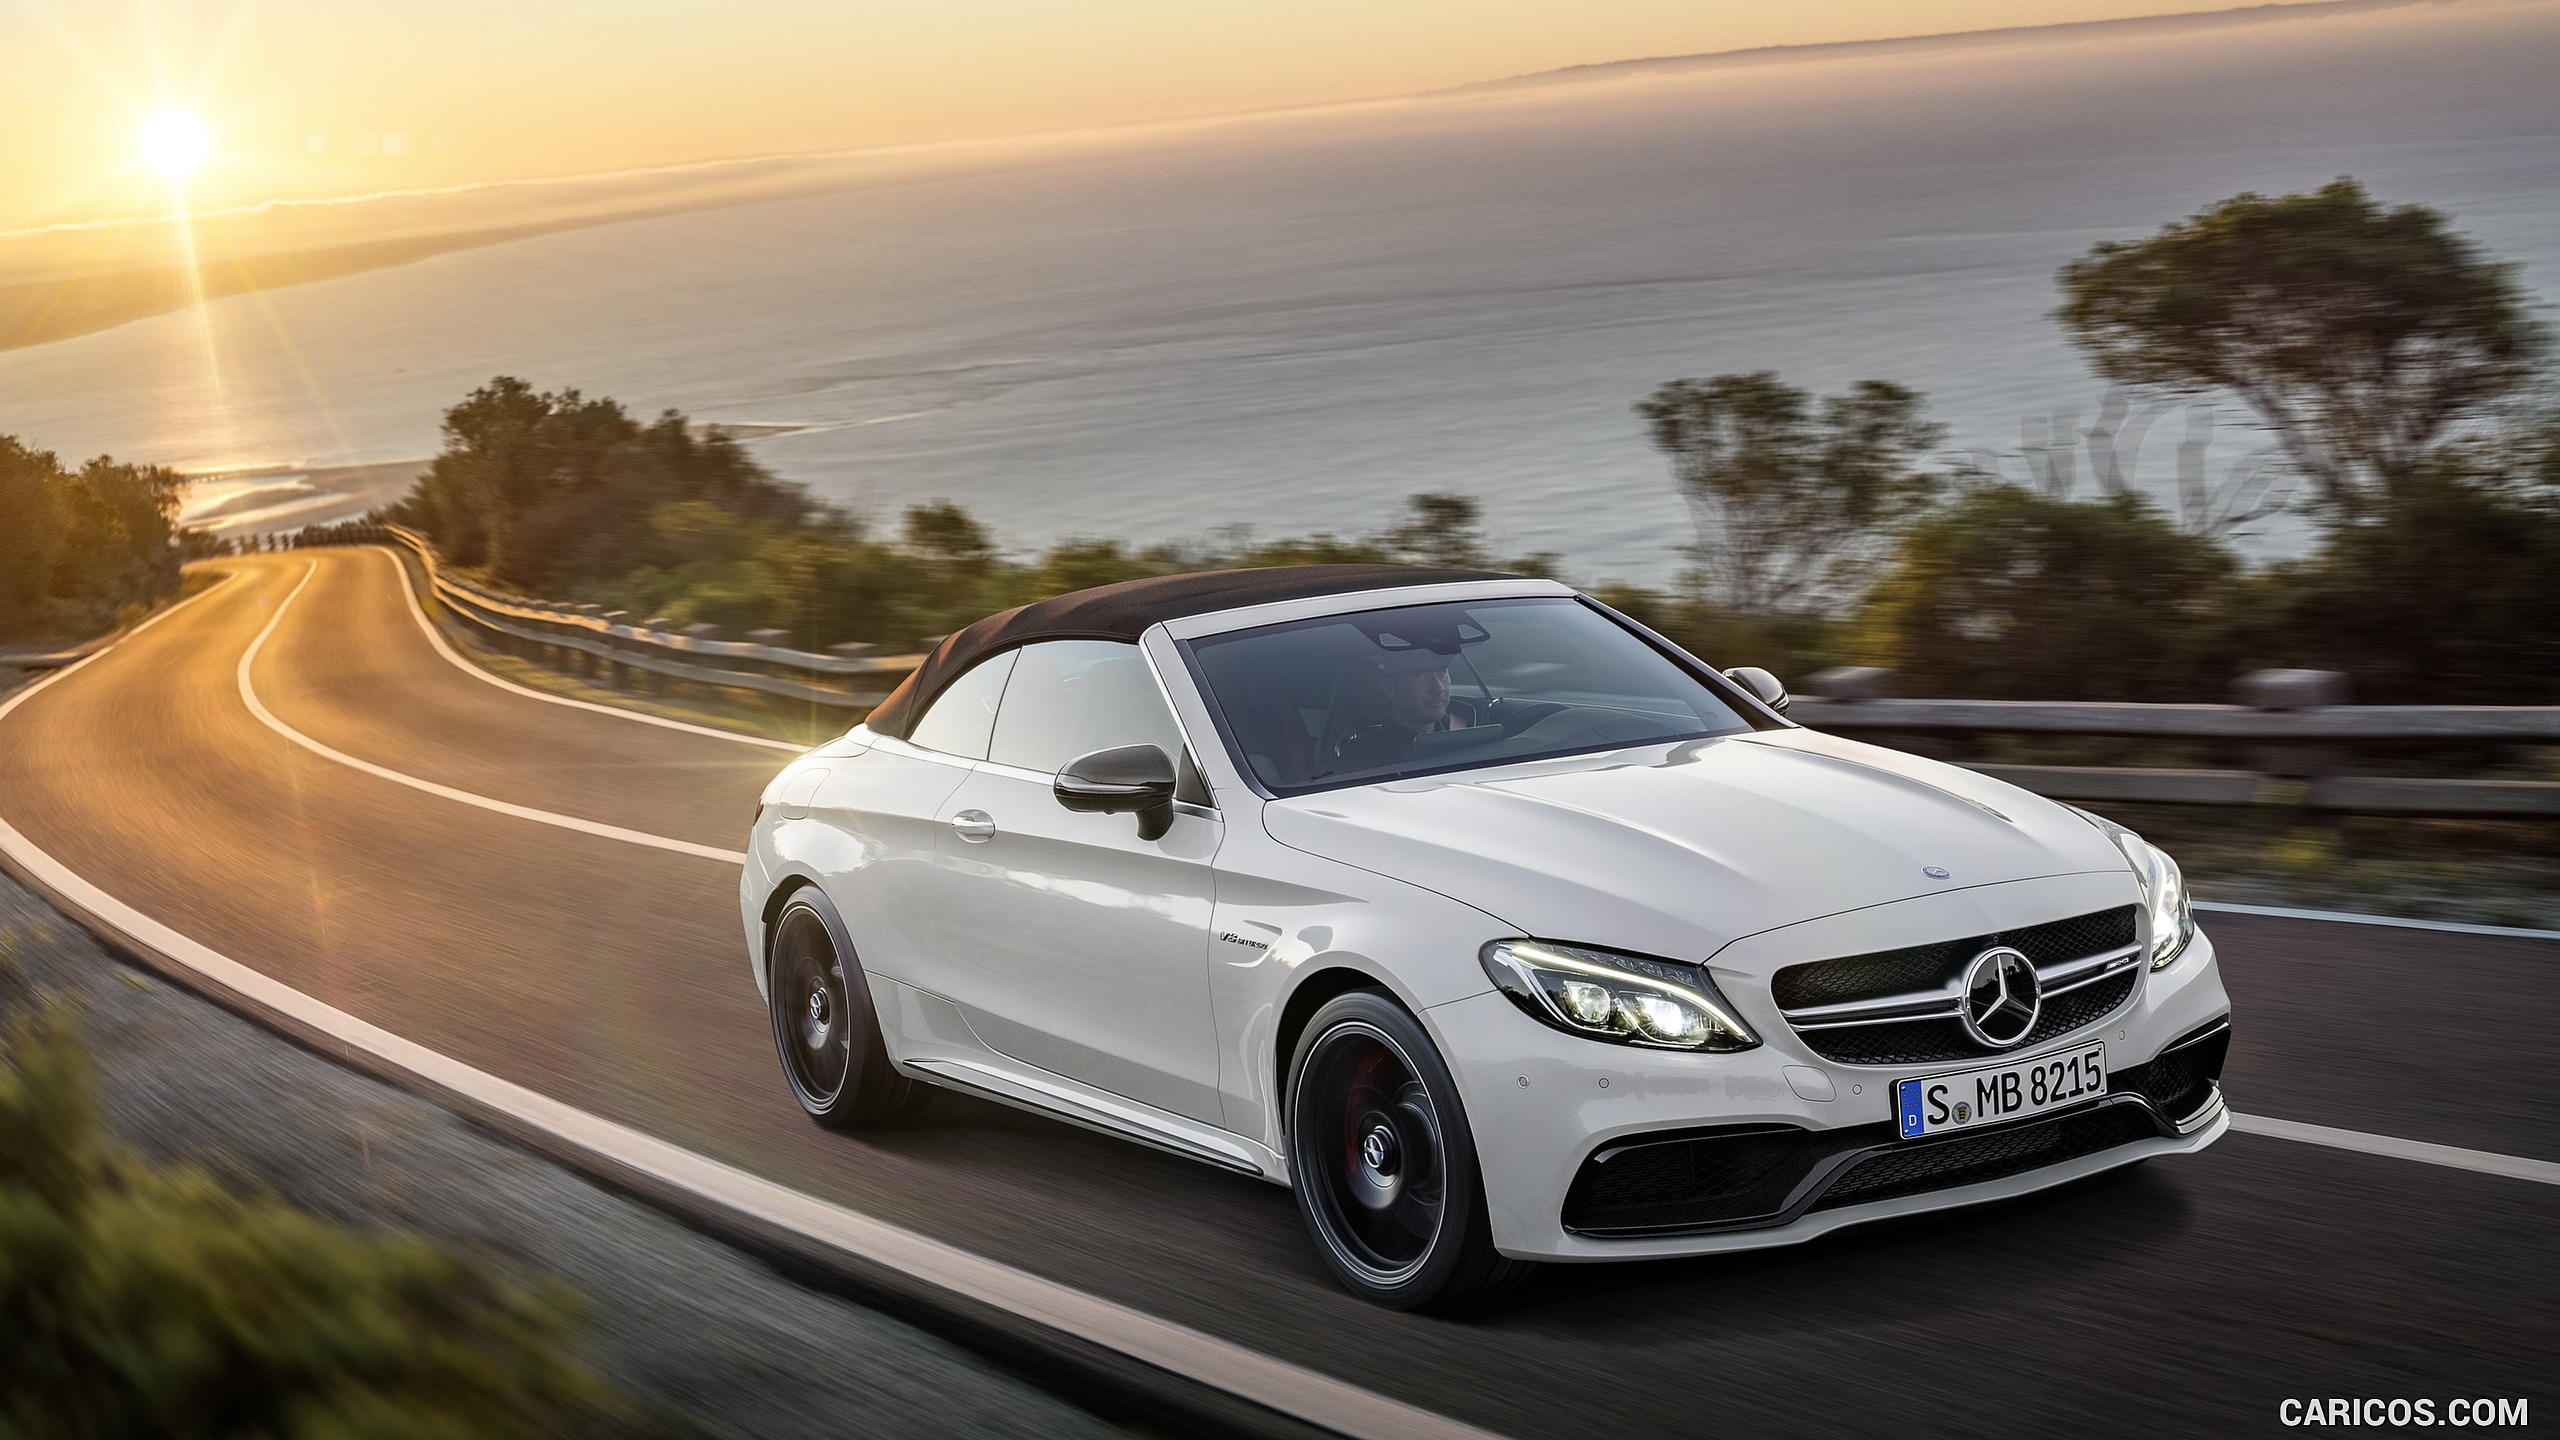 2017 Mercedes-AMG C63 S Cabriolet (Chassis: A205, Color: Designo Diamond White Bright) - Front, #4 of 222